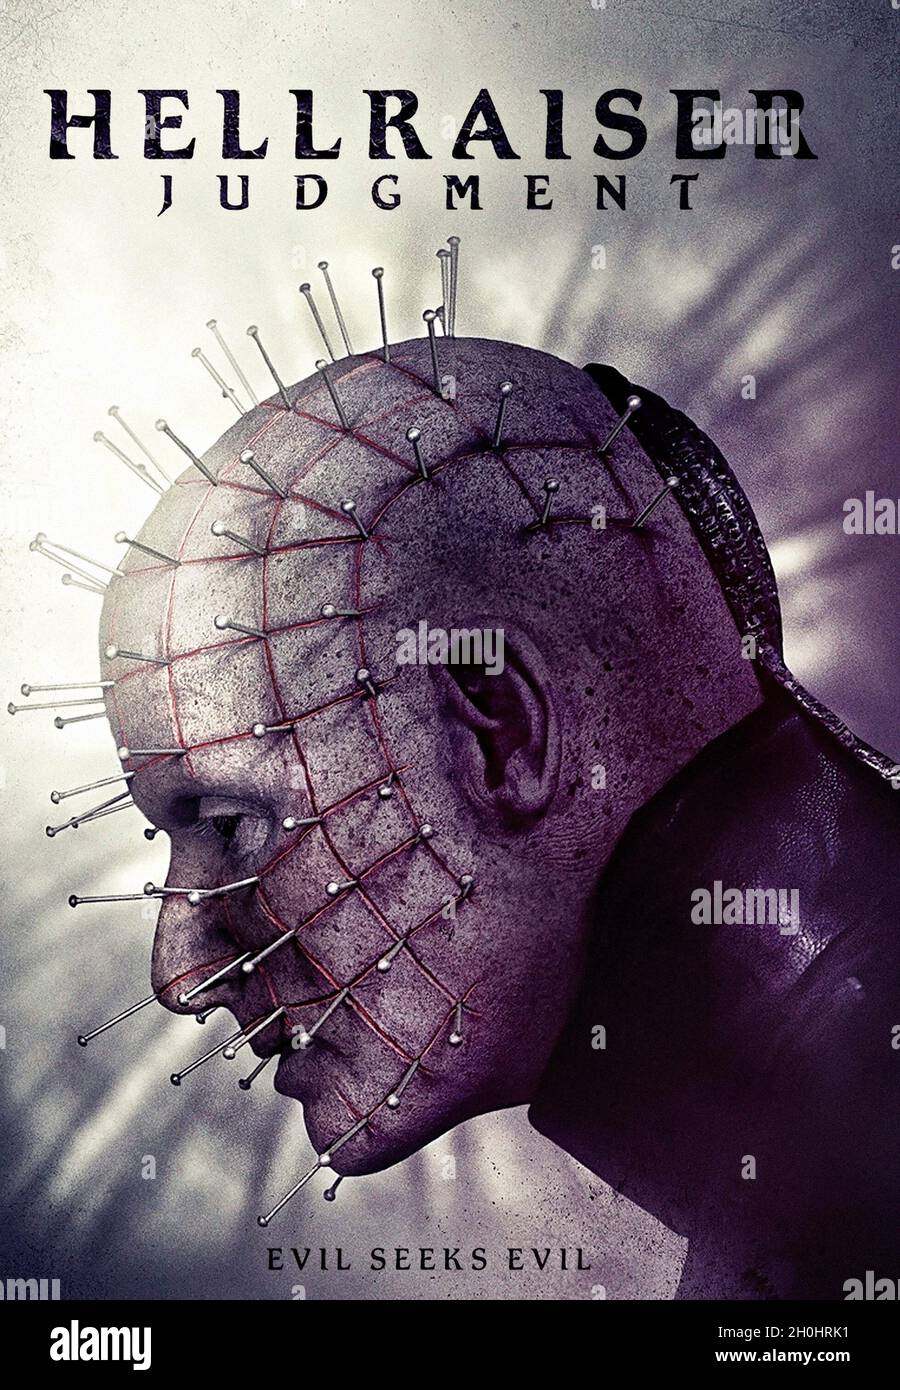 RELEASE DATE: February 3, 2018 TITLE: Hellraiser: Judgment STUDIO:  Dimension Films DIRECTOR: Gary J. Tunnicliffe Clive Barker PLOT: Detectives  Sean and David Carter are on the case to find a gruesome serial